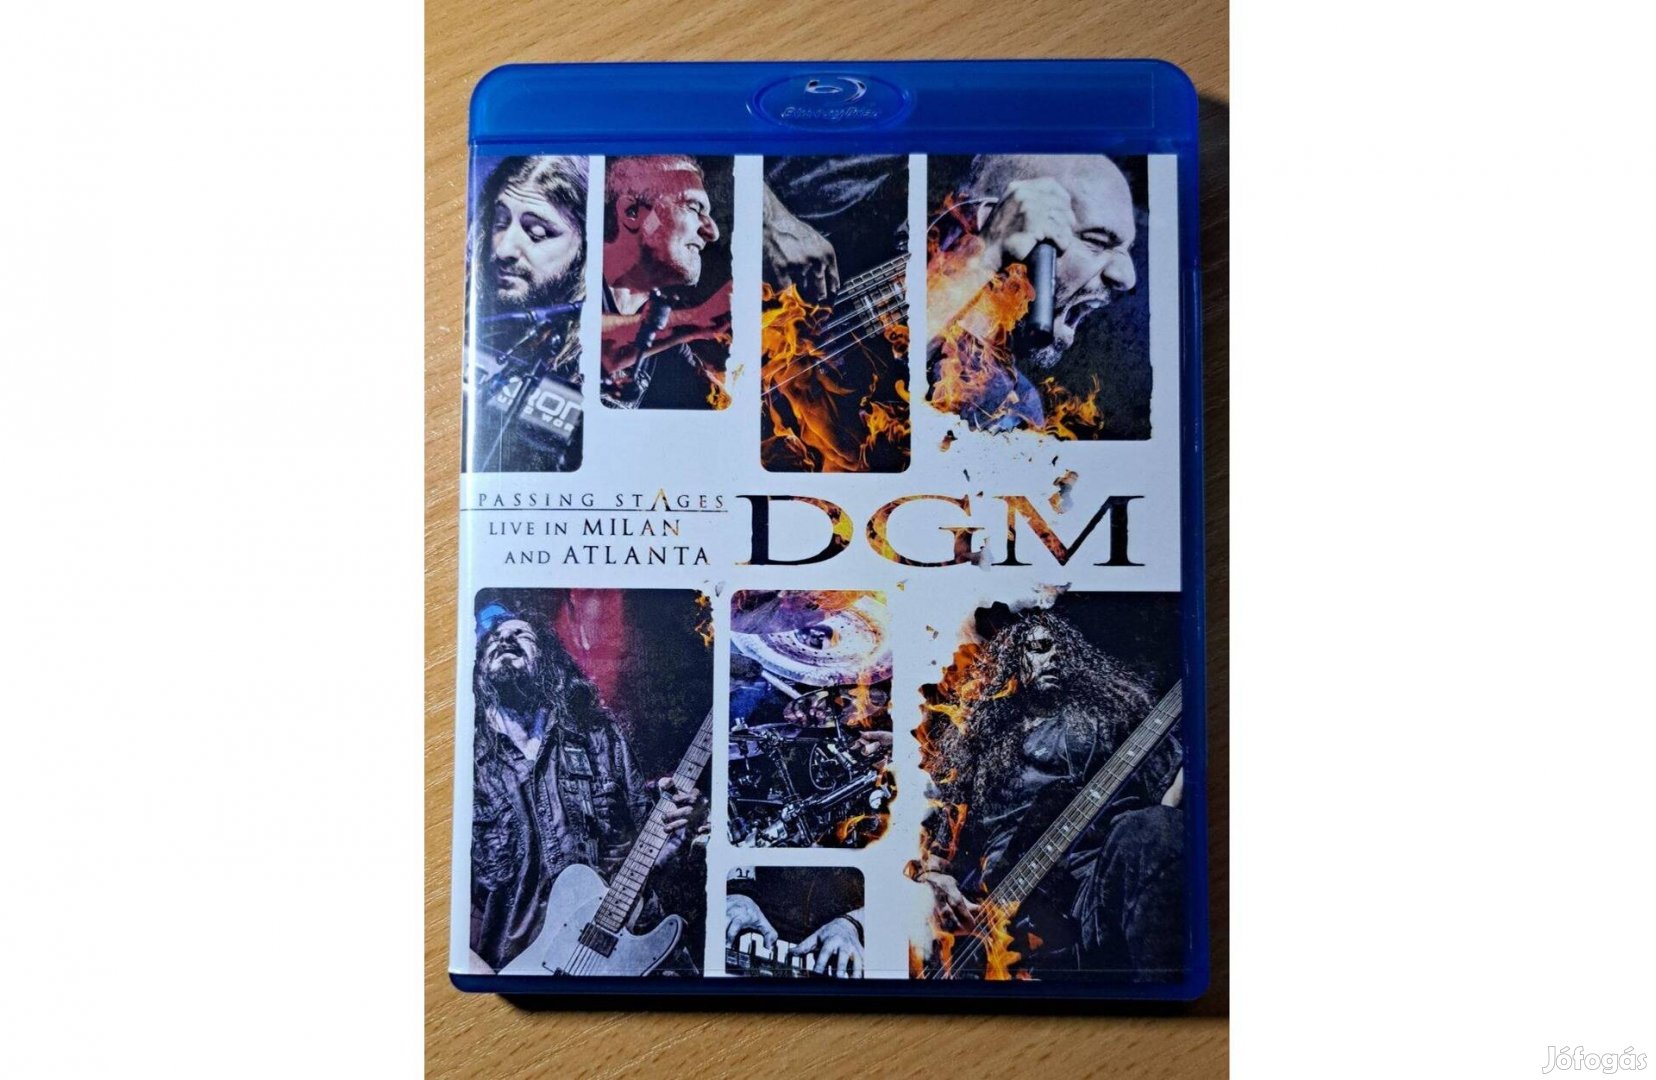 DGM - Passing Stages - Blu-ray